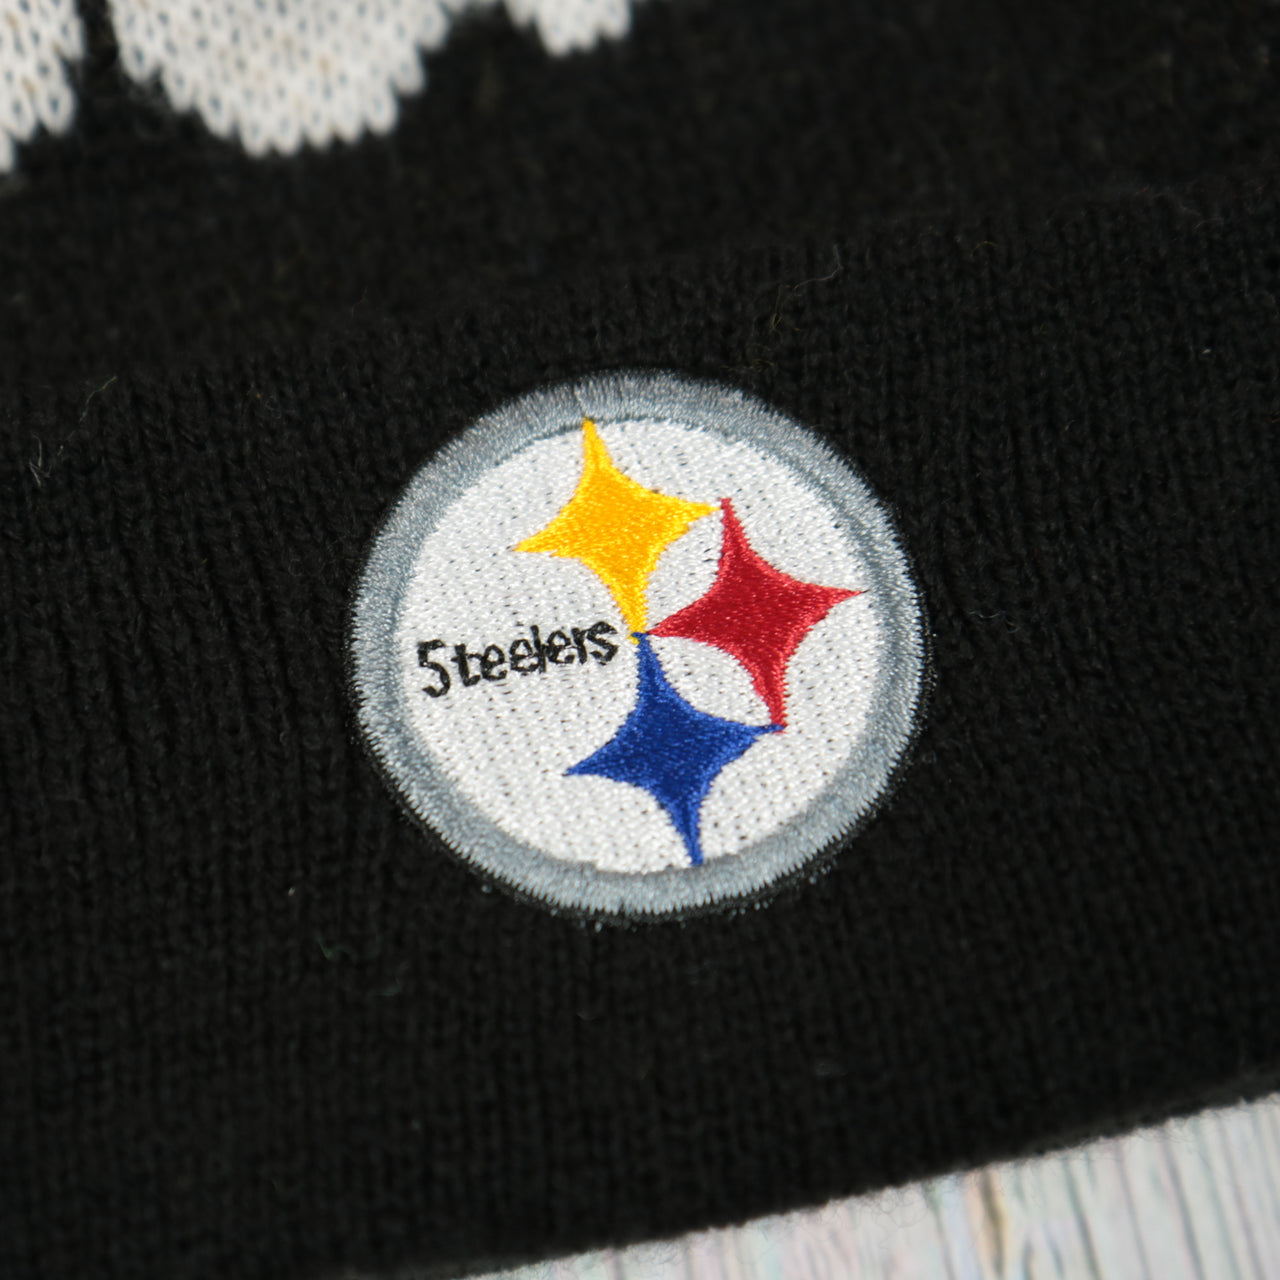 steelers logo on the Pittsburgh Steelers Youth Sized "Underdog" Knit Pom Winter Beanie